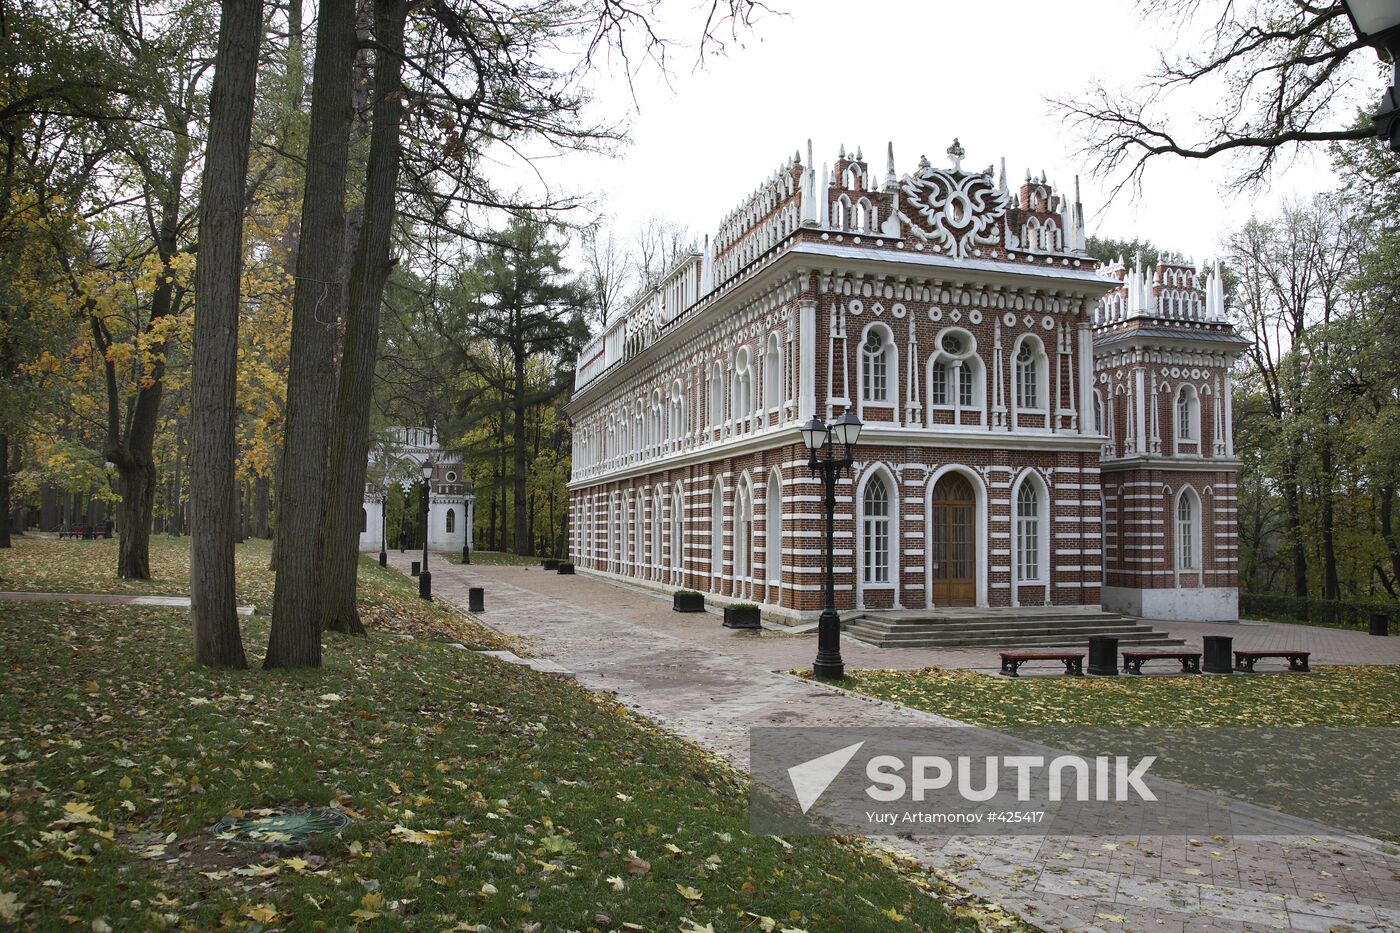 The Tsaritsyno museum-reserve